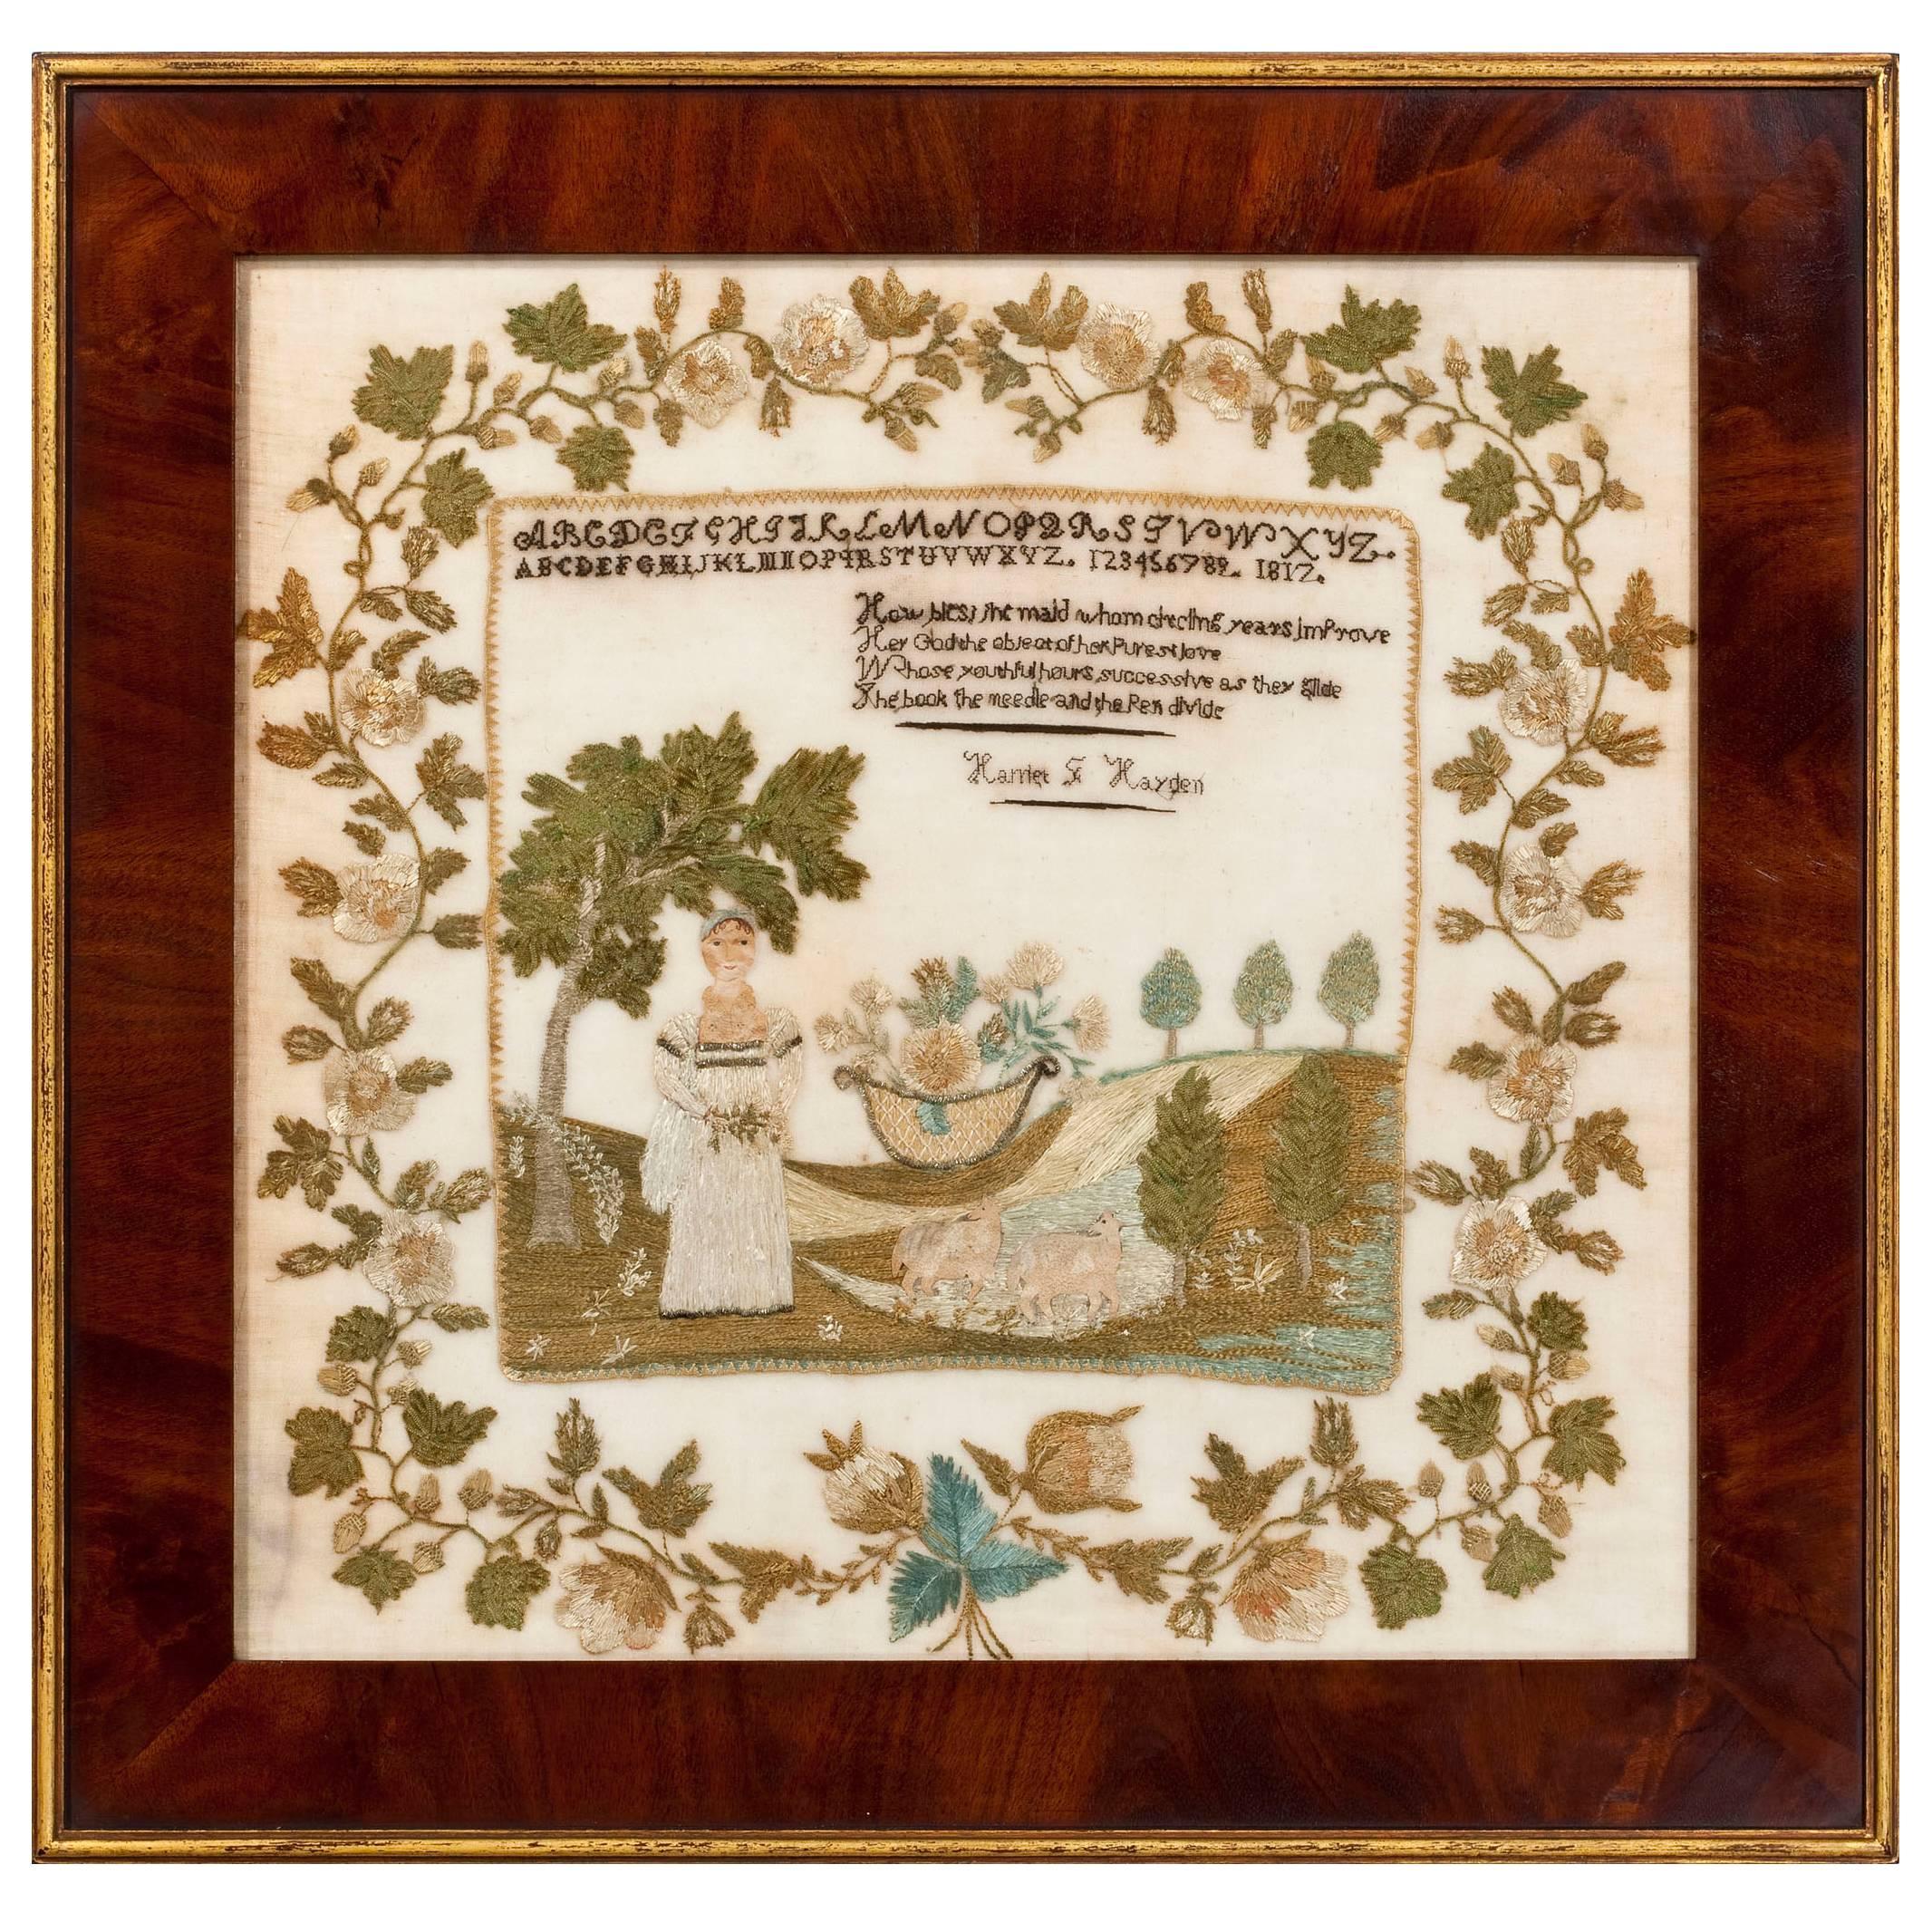 Outstanding New Hampshire Sampler, Dated 1817